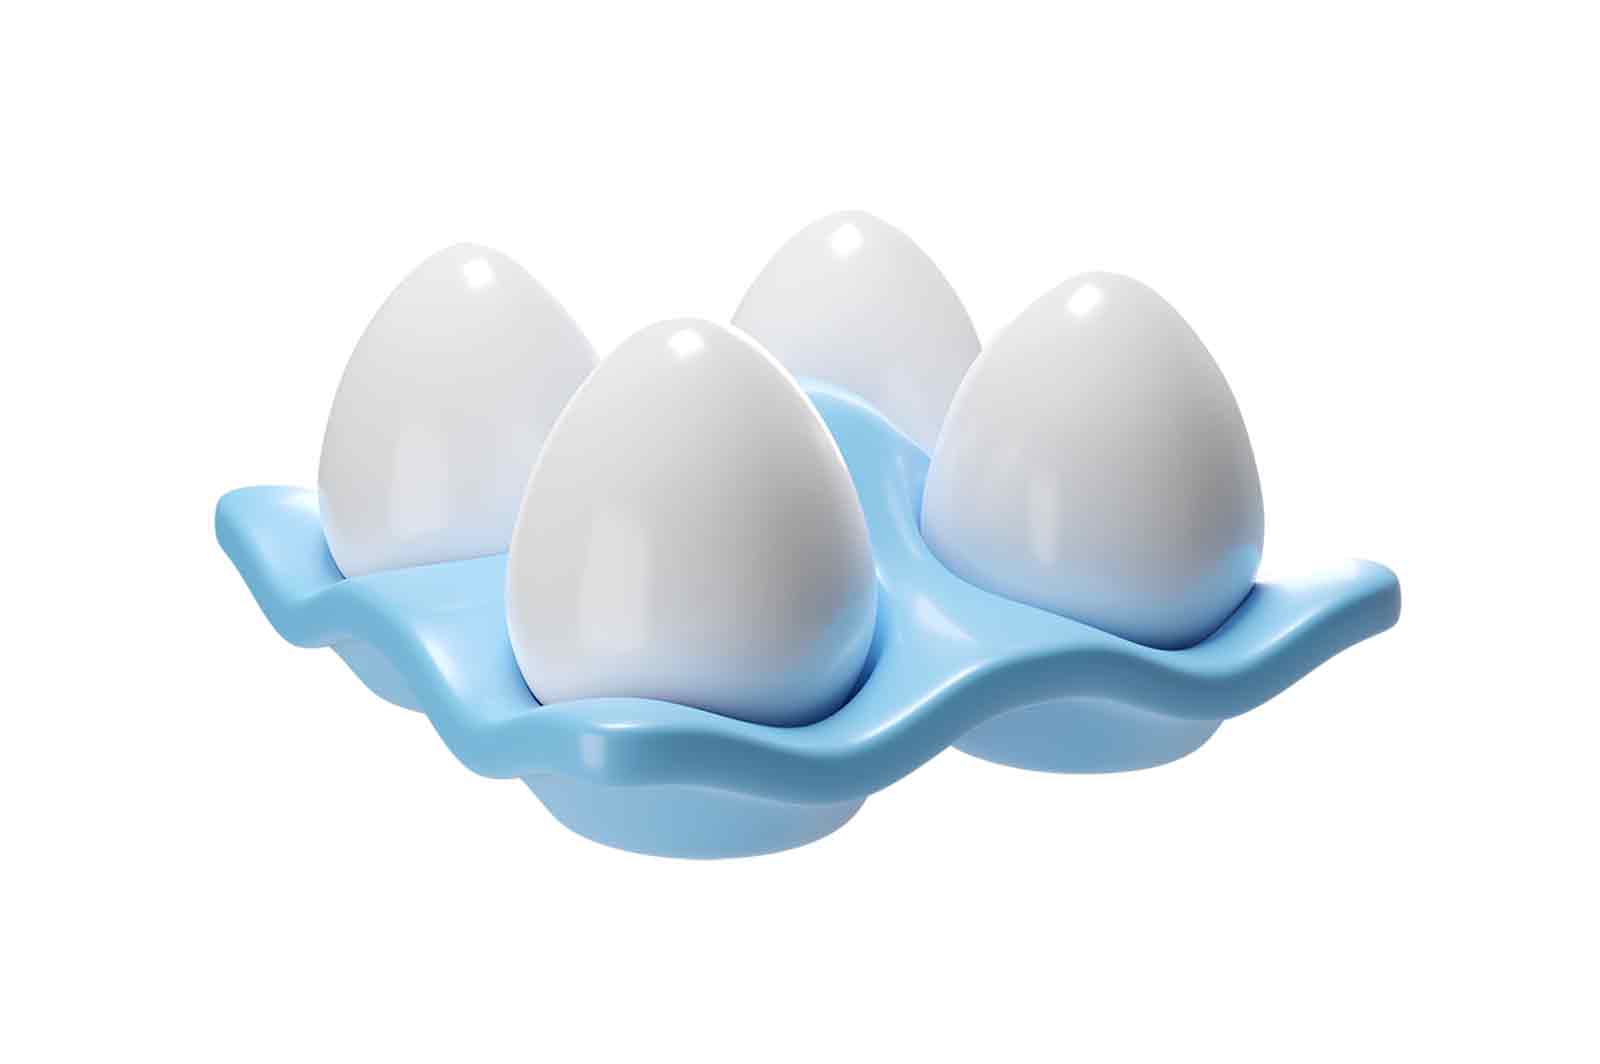 Egg tray, 3d rendered illustration of a blue container with four white eggs.